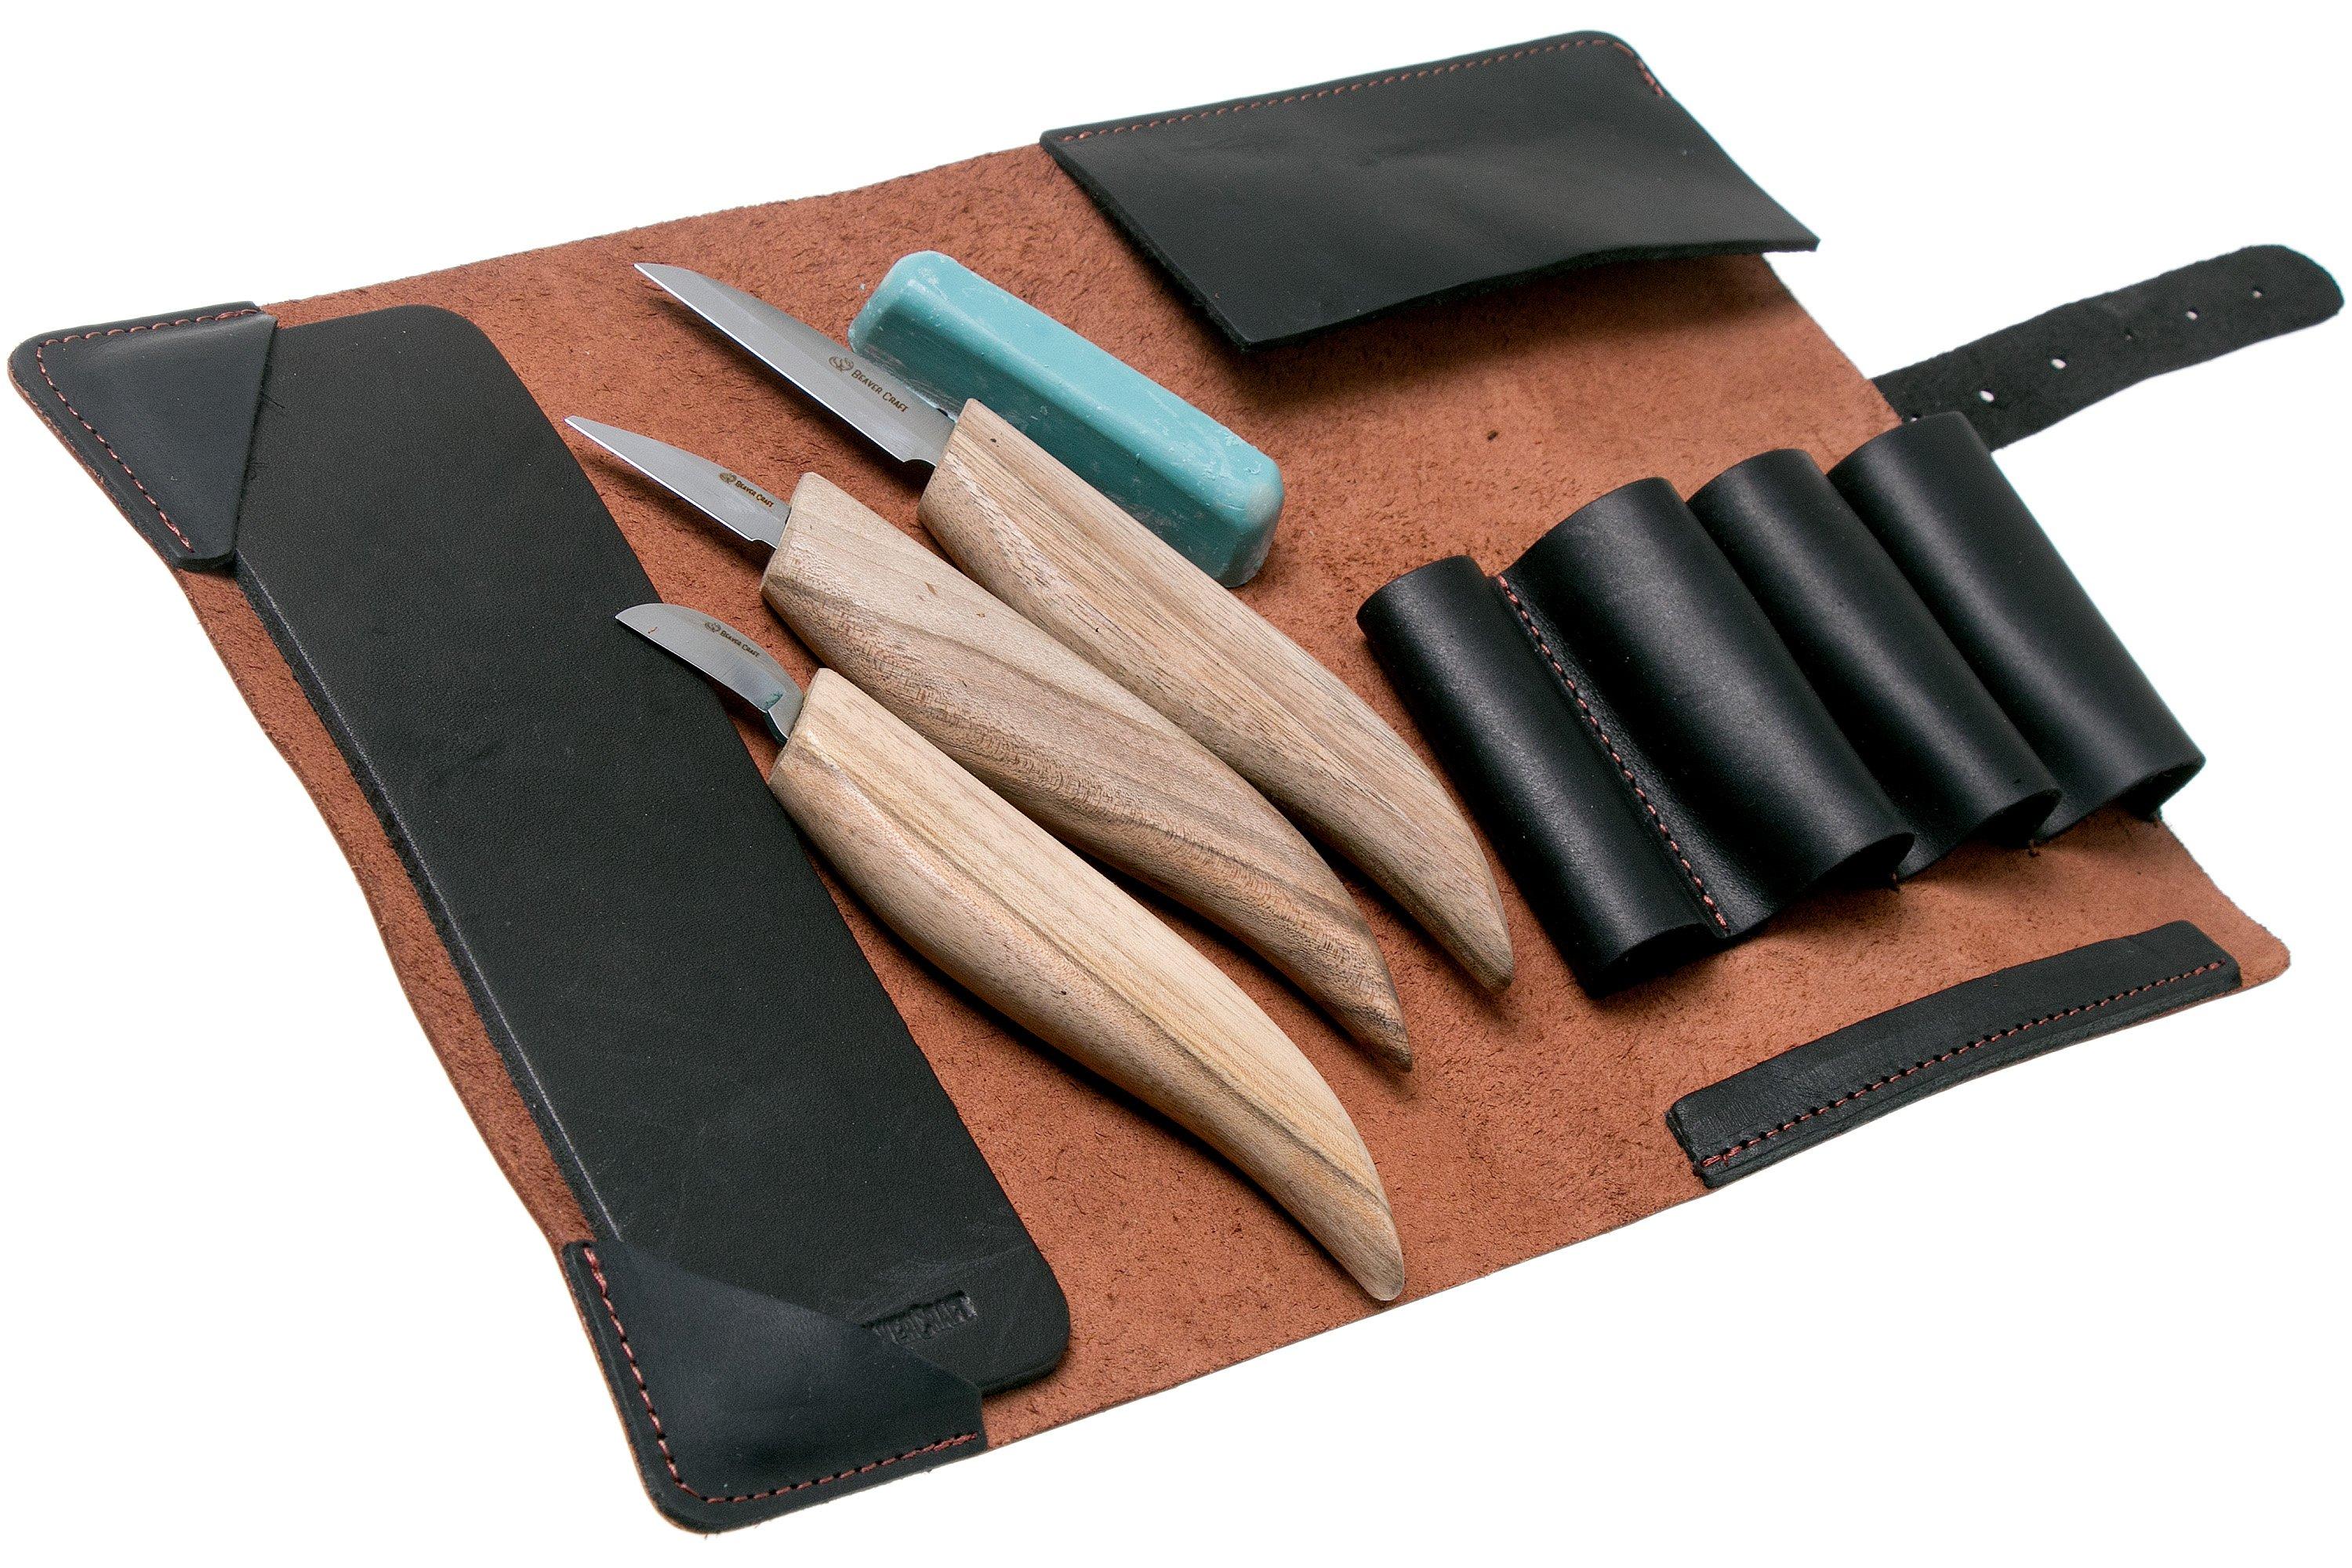 Best 6 leather strops for sharpening wood carving knives 2021